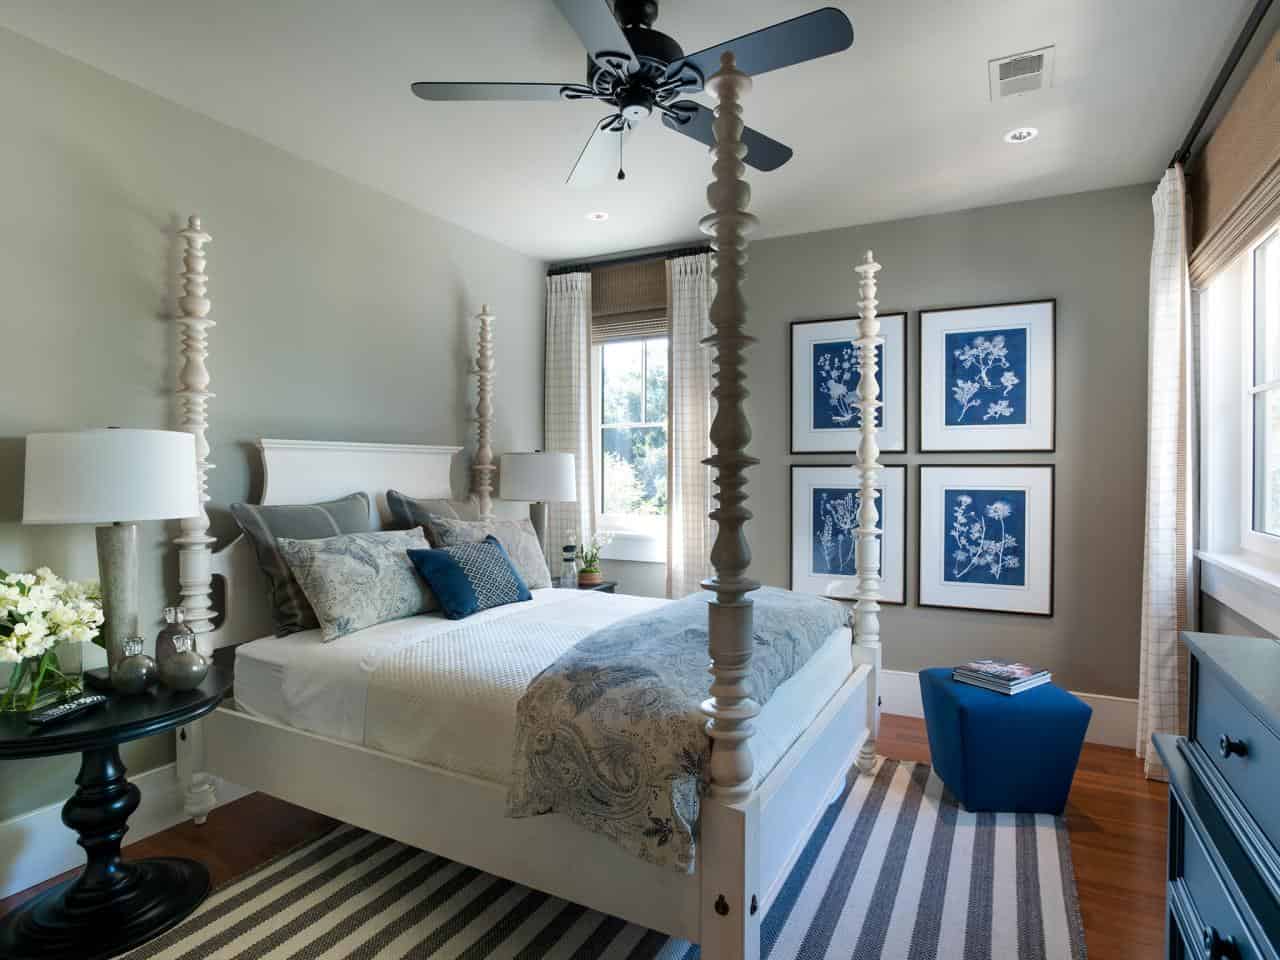 Gray and blue make the perfect ultimate guest room combination because of how well they pair together.